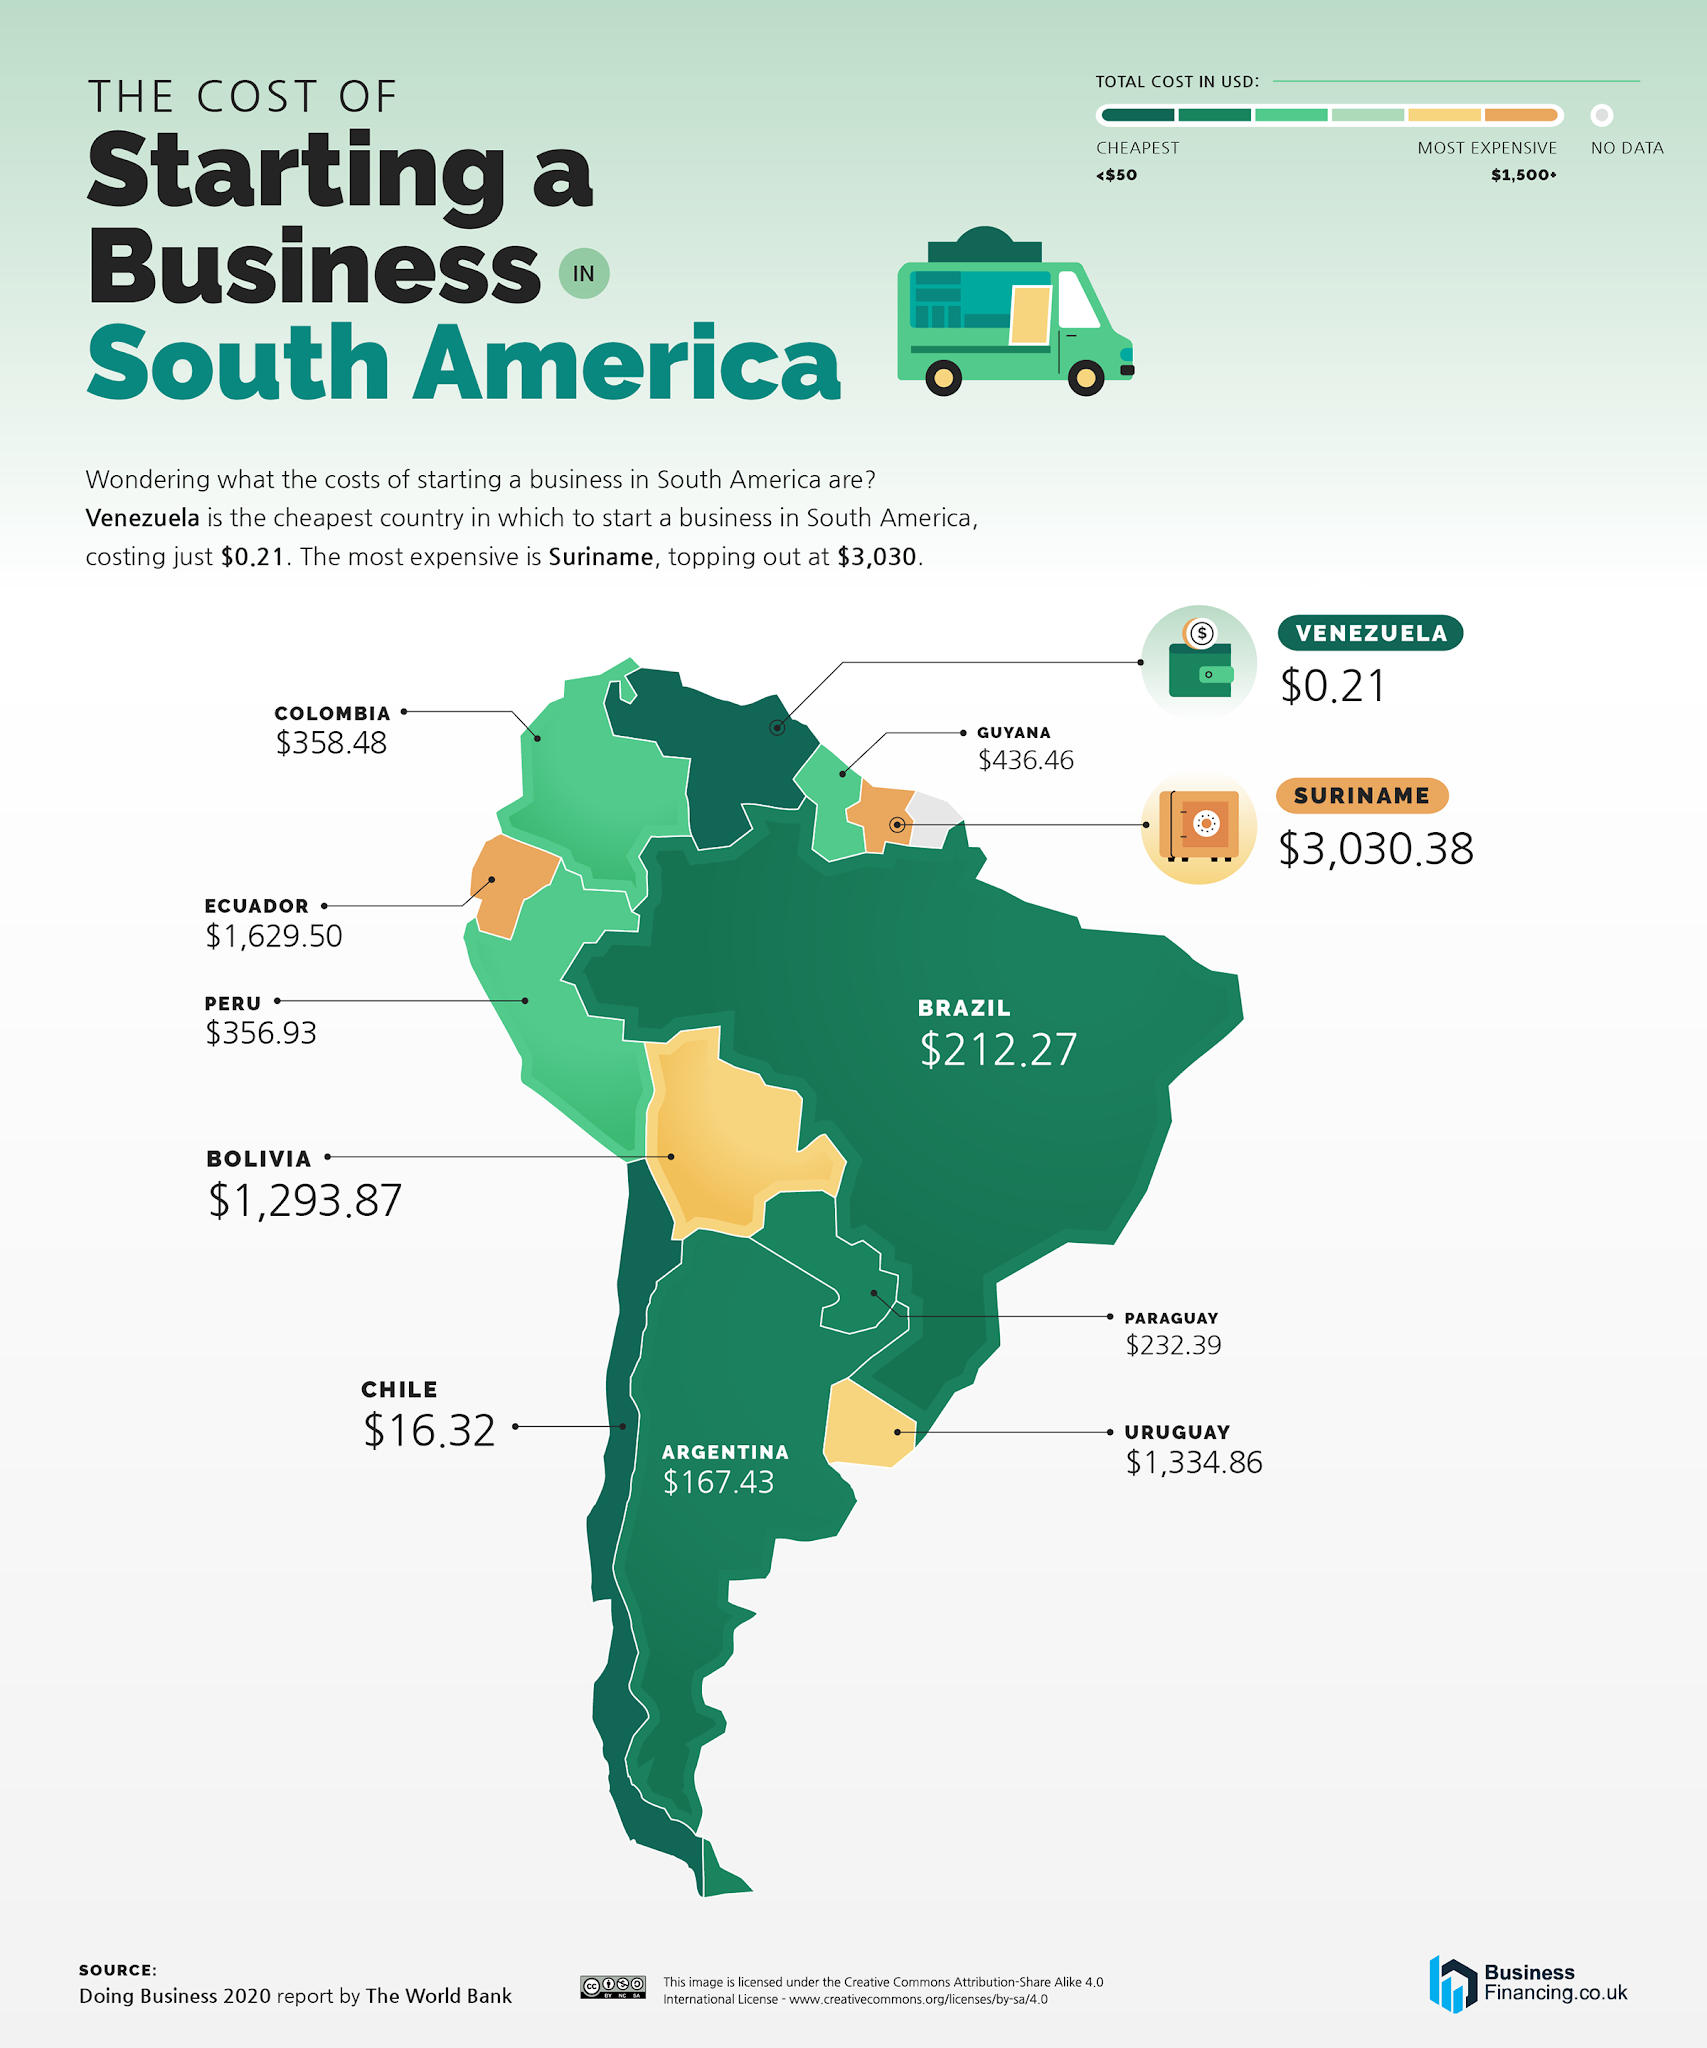 The Cost of Starting a Business in South America